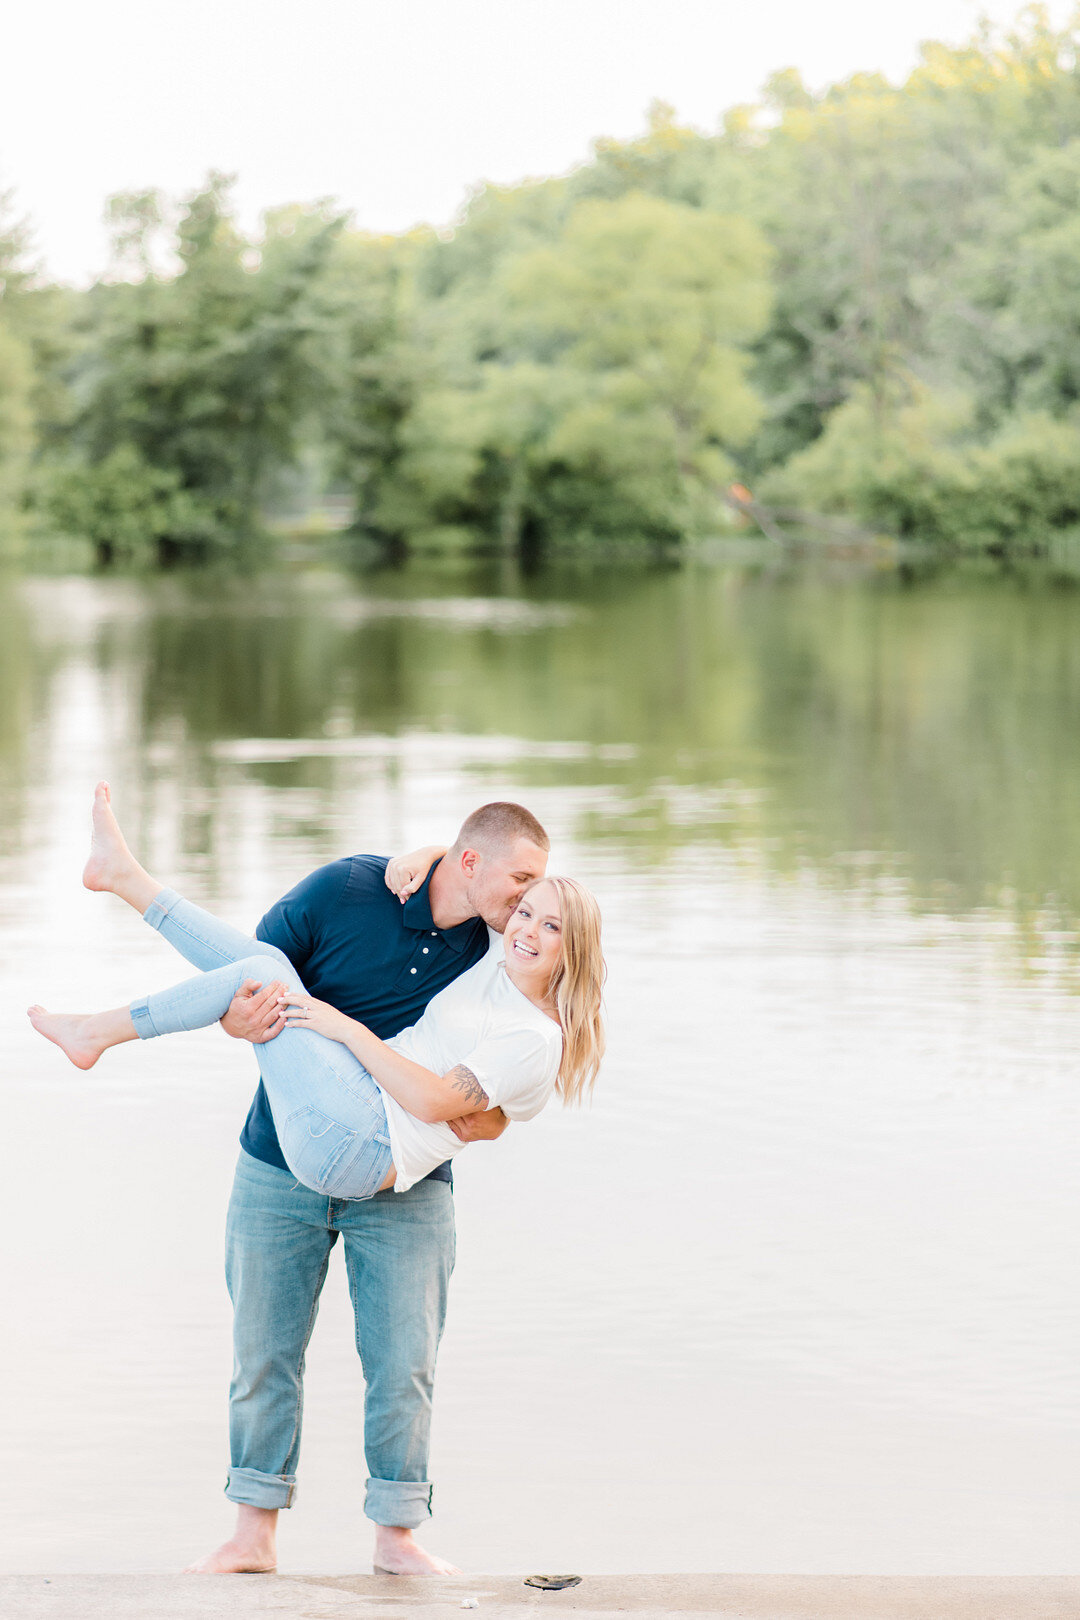 Gifford Pinchot State Park served as the backdrop for this summer outdoor engagement session by Lindsay Eileen Photography in Lewisberry, Pennsylvania